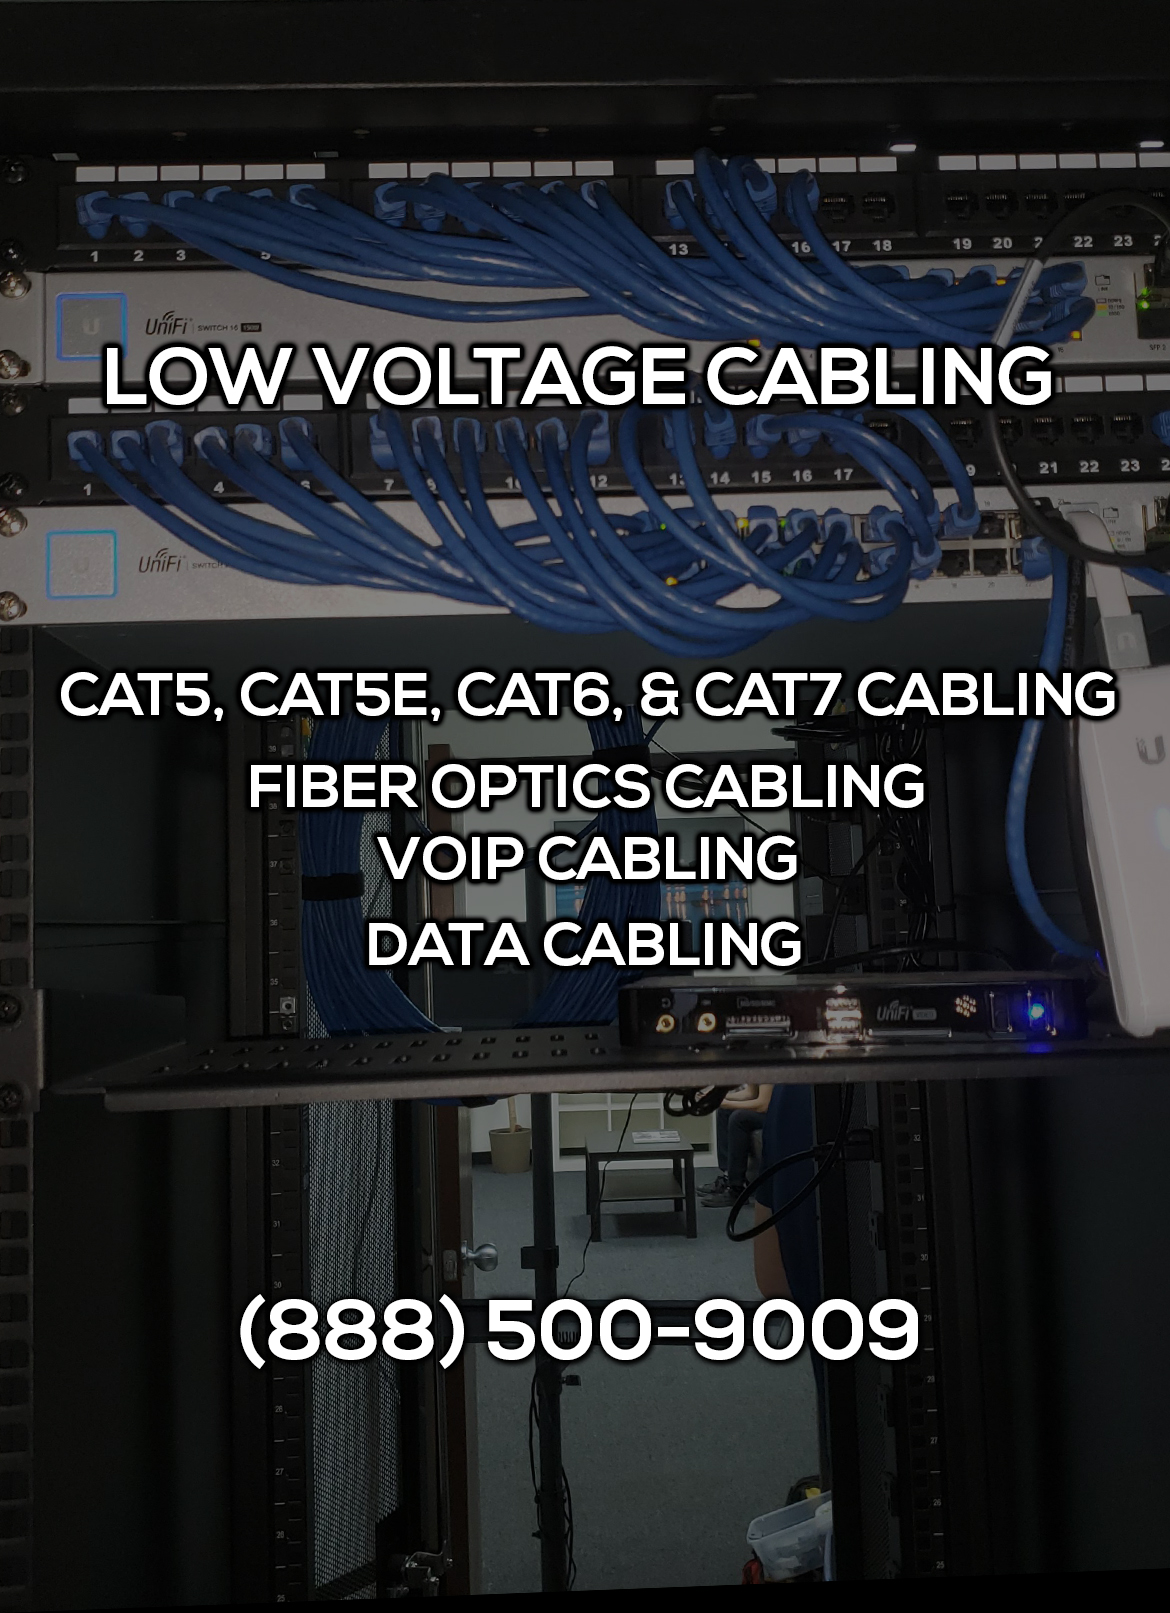 Low Voltage Cabling in Mission Viejo